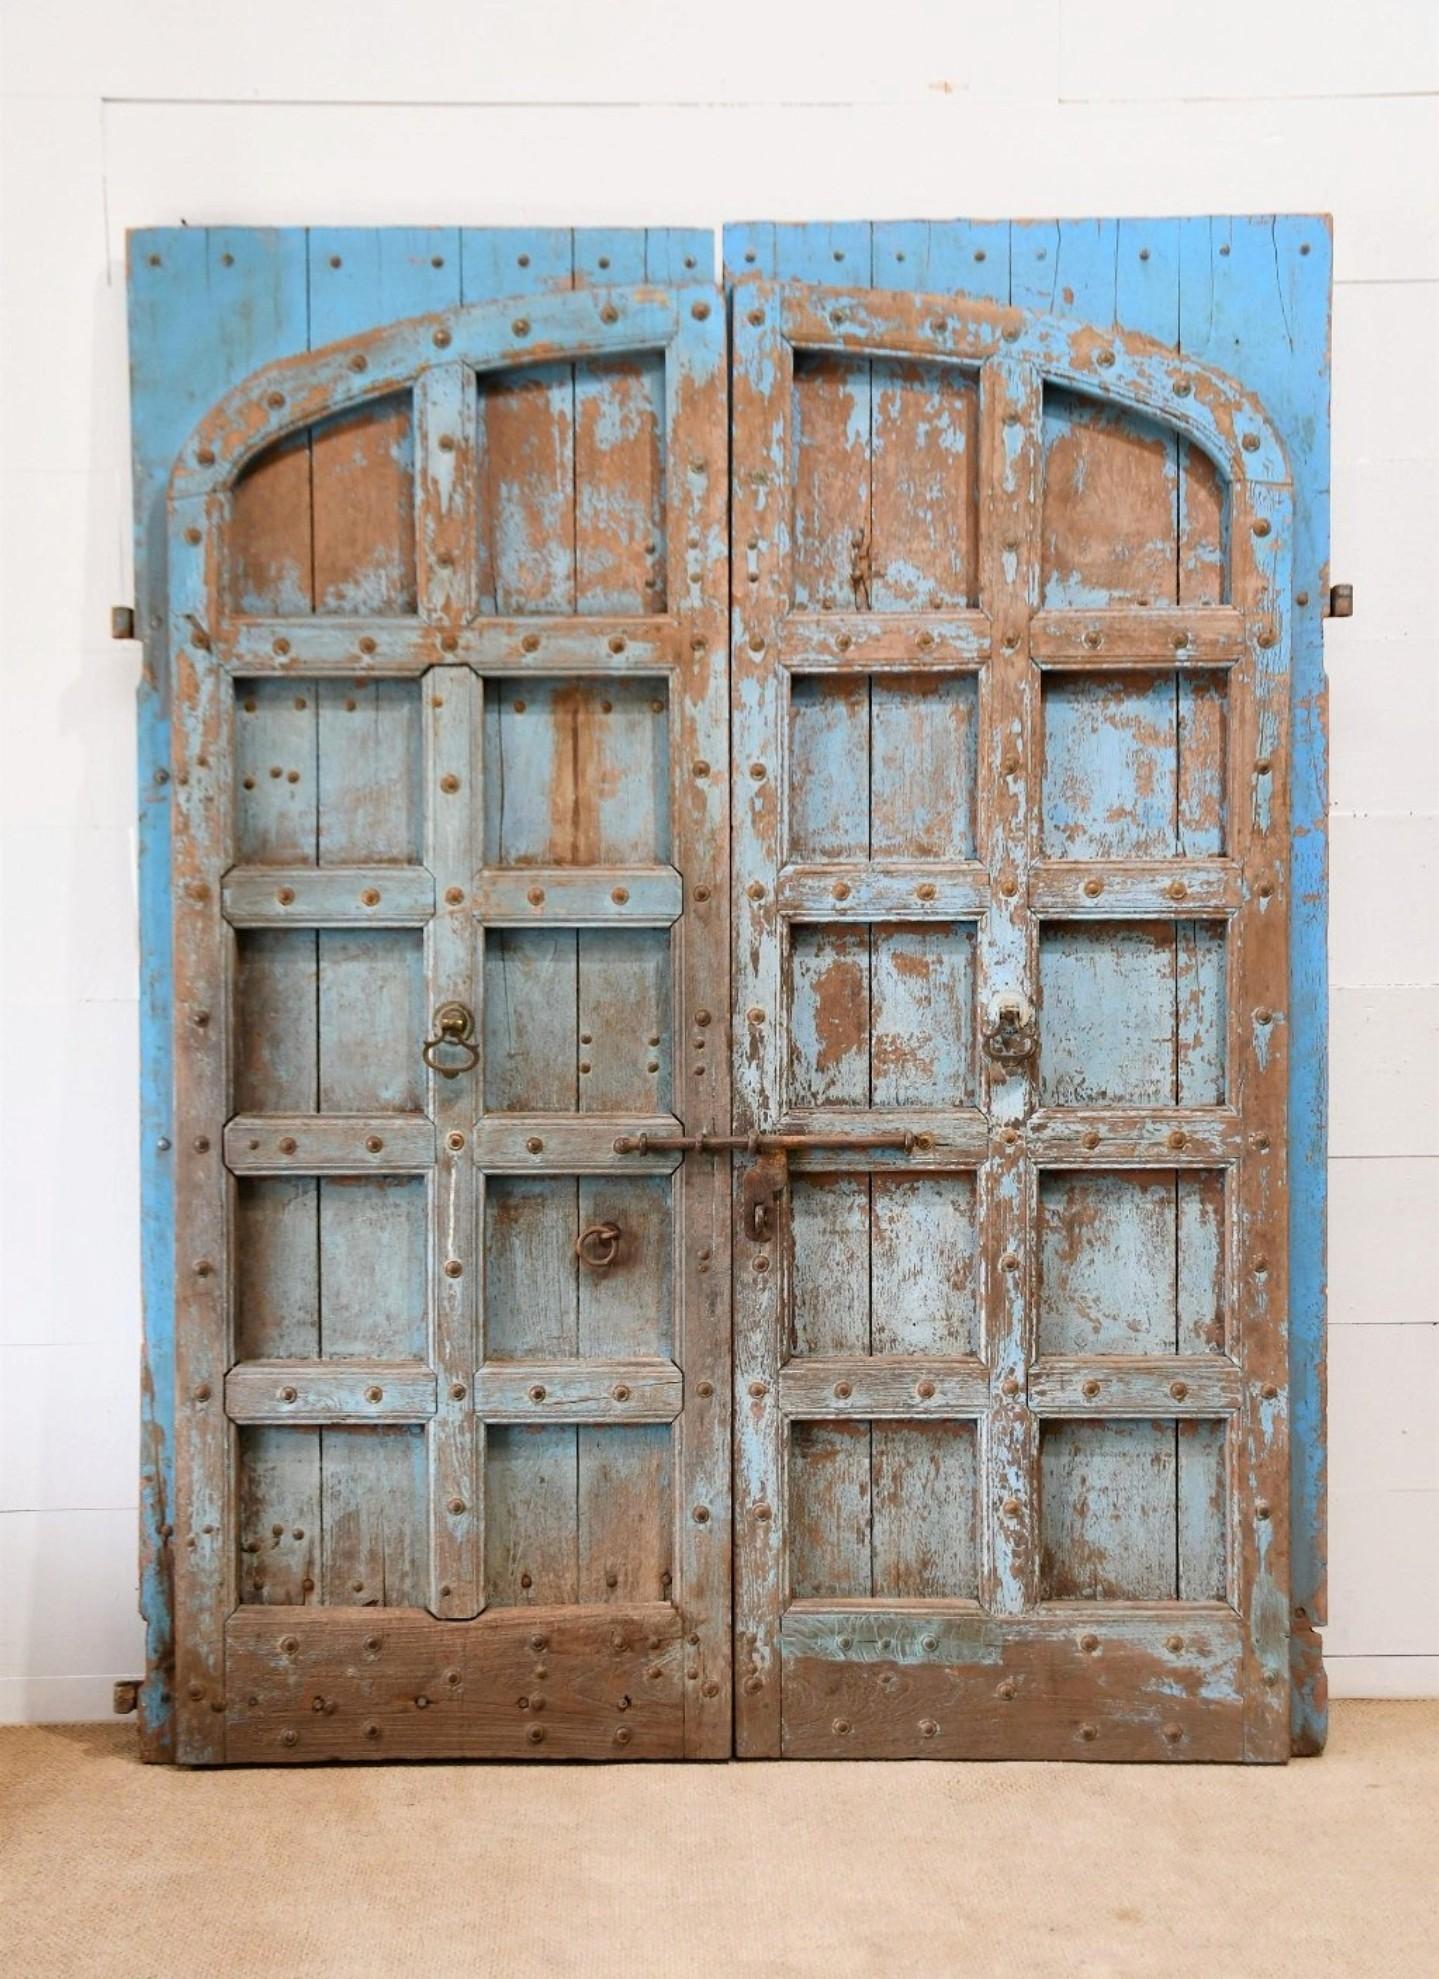 A magnificent pair of historic antique Indian hand carved and painted solid wood entry doors. 

The monumental castle size, strong forged iron mounted, heavily reinforced solid teak construction indicate they were likely originally used to keep a